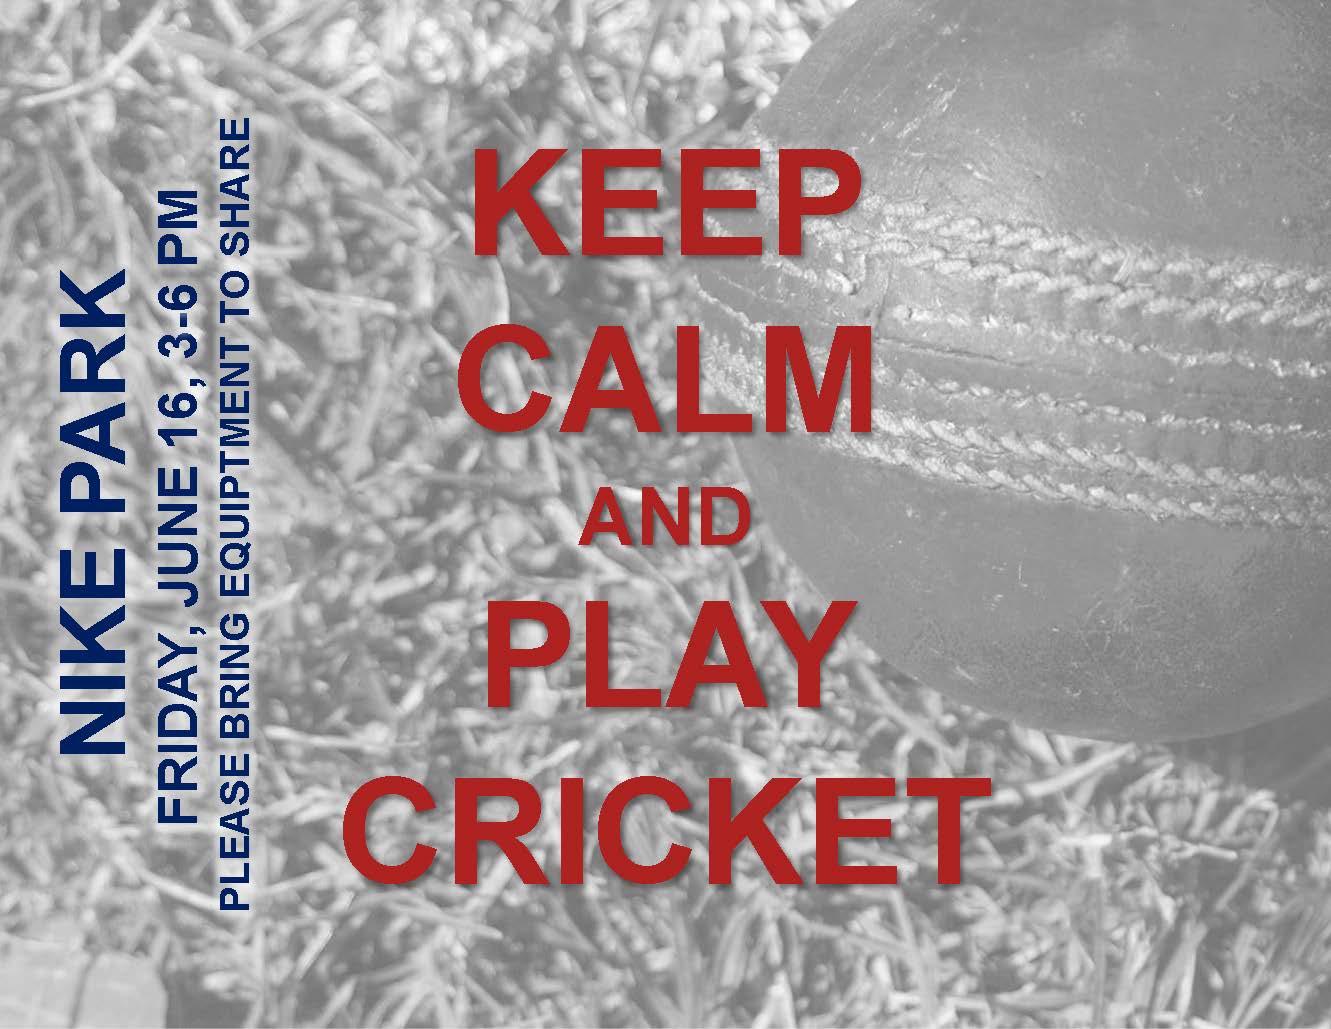 Cricket Match This Friday!